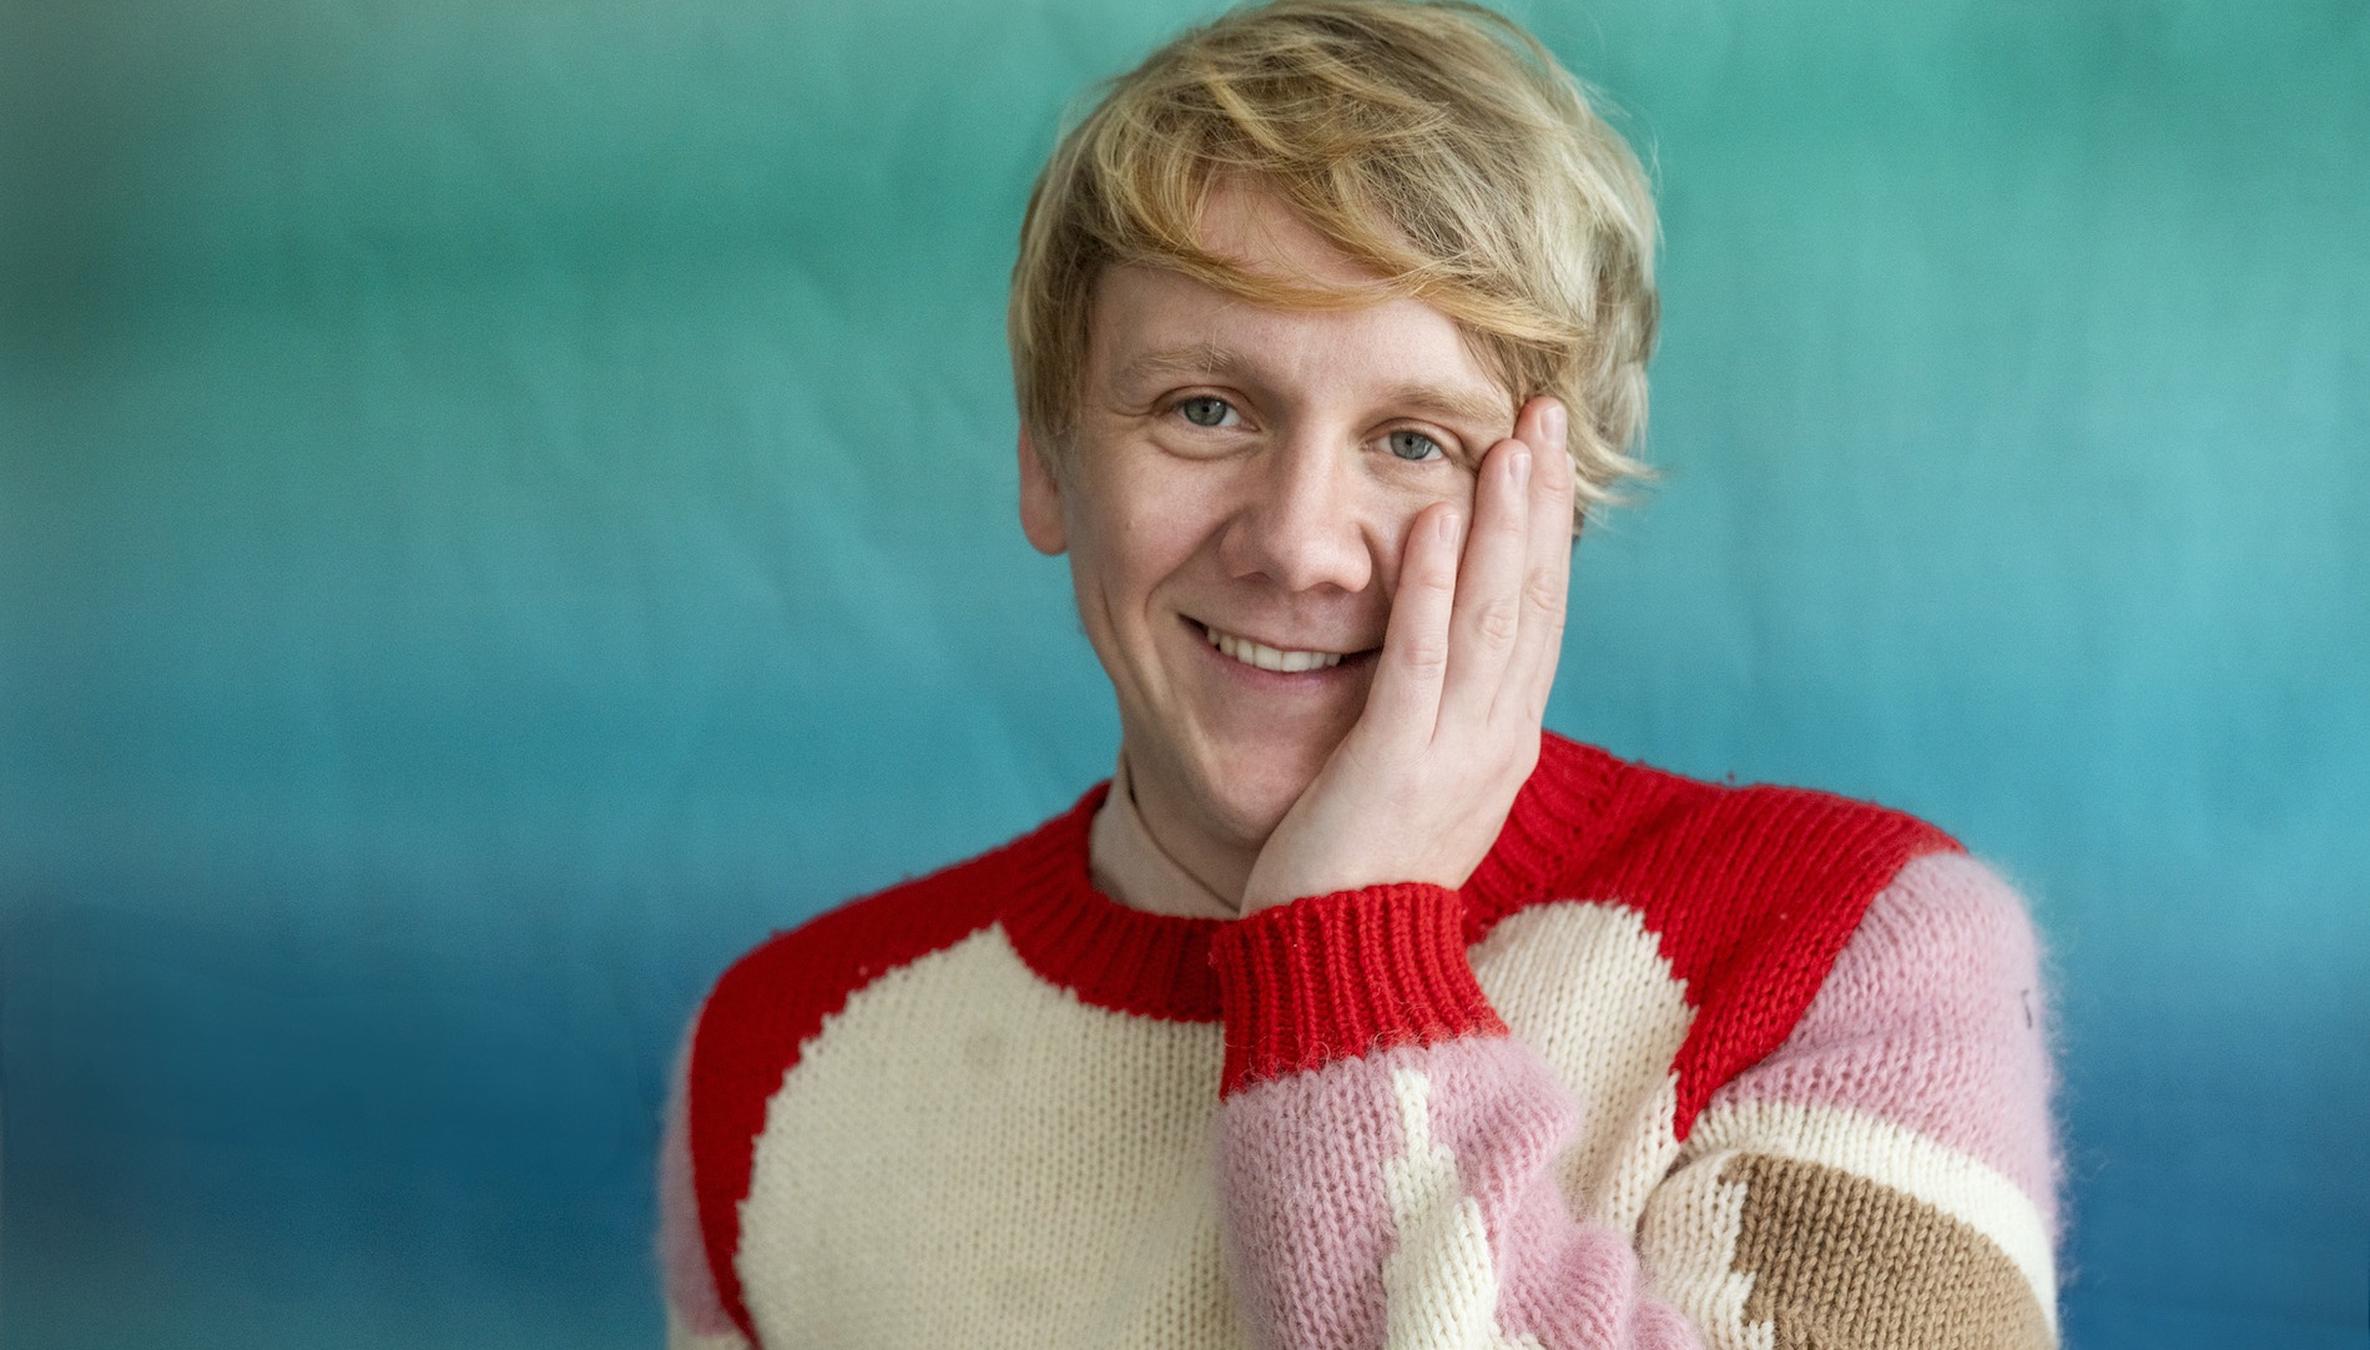 Let’s Tidy Up – An interview with comedian Josh Thomas